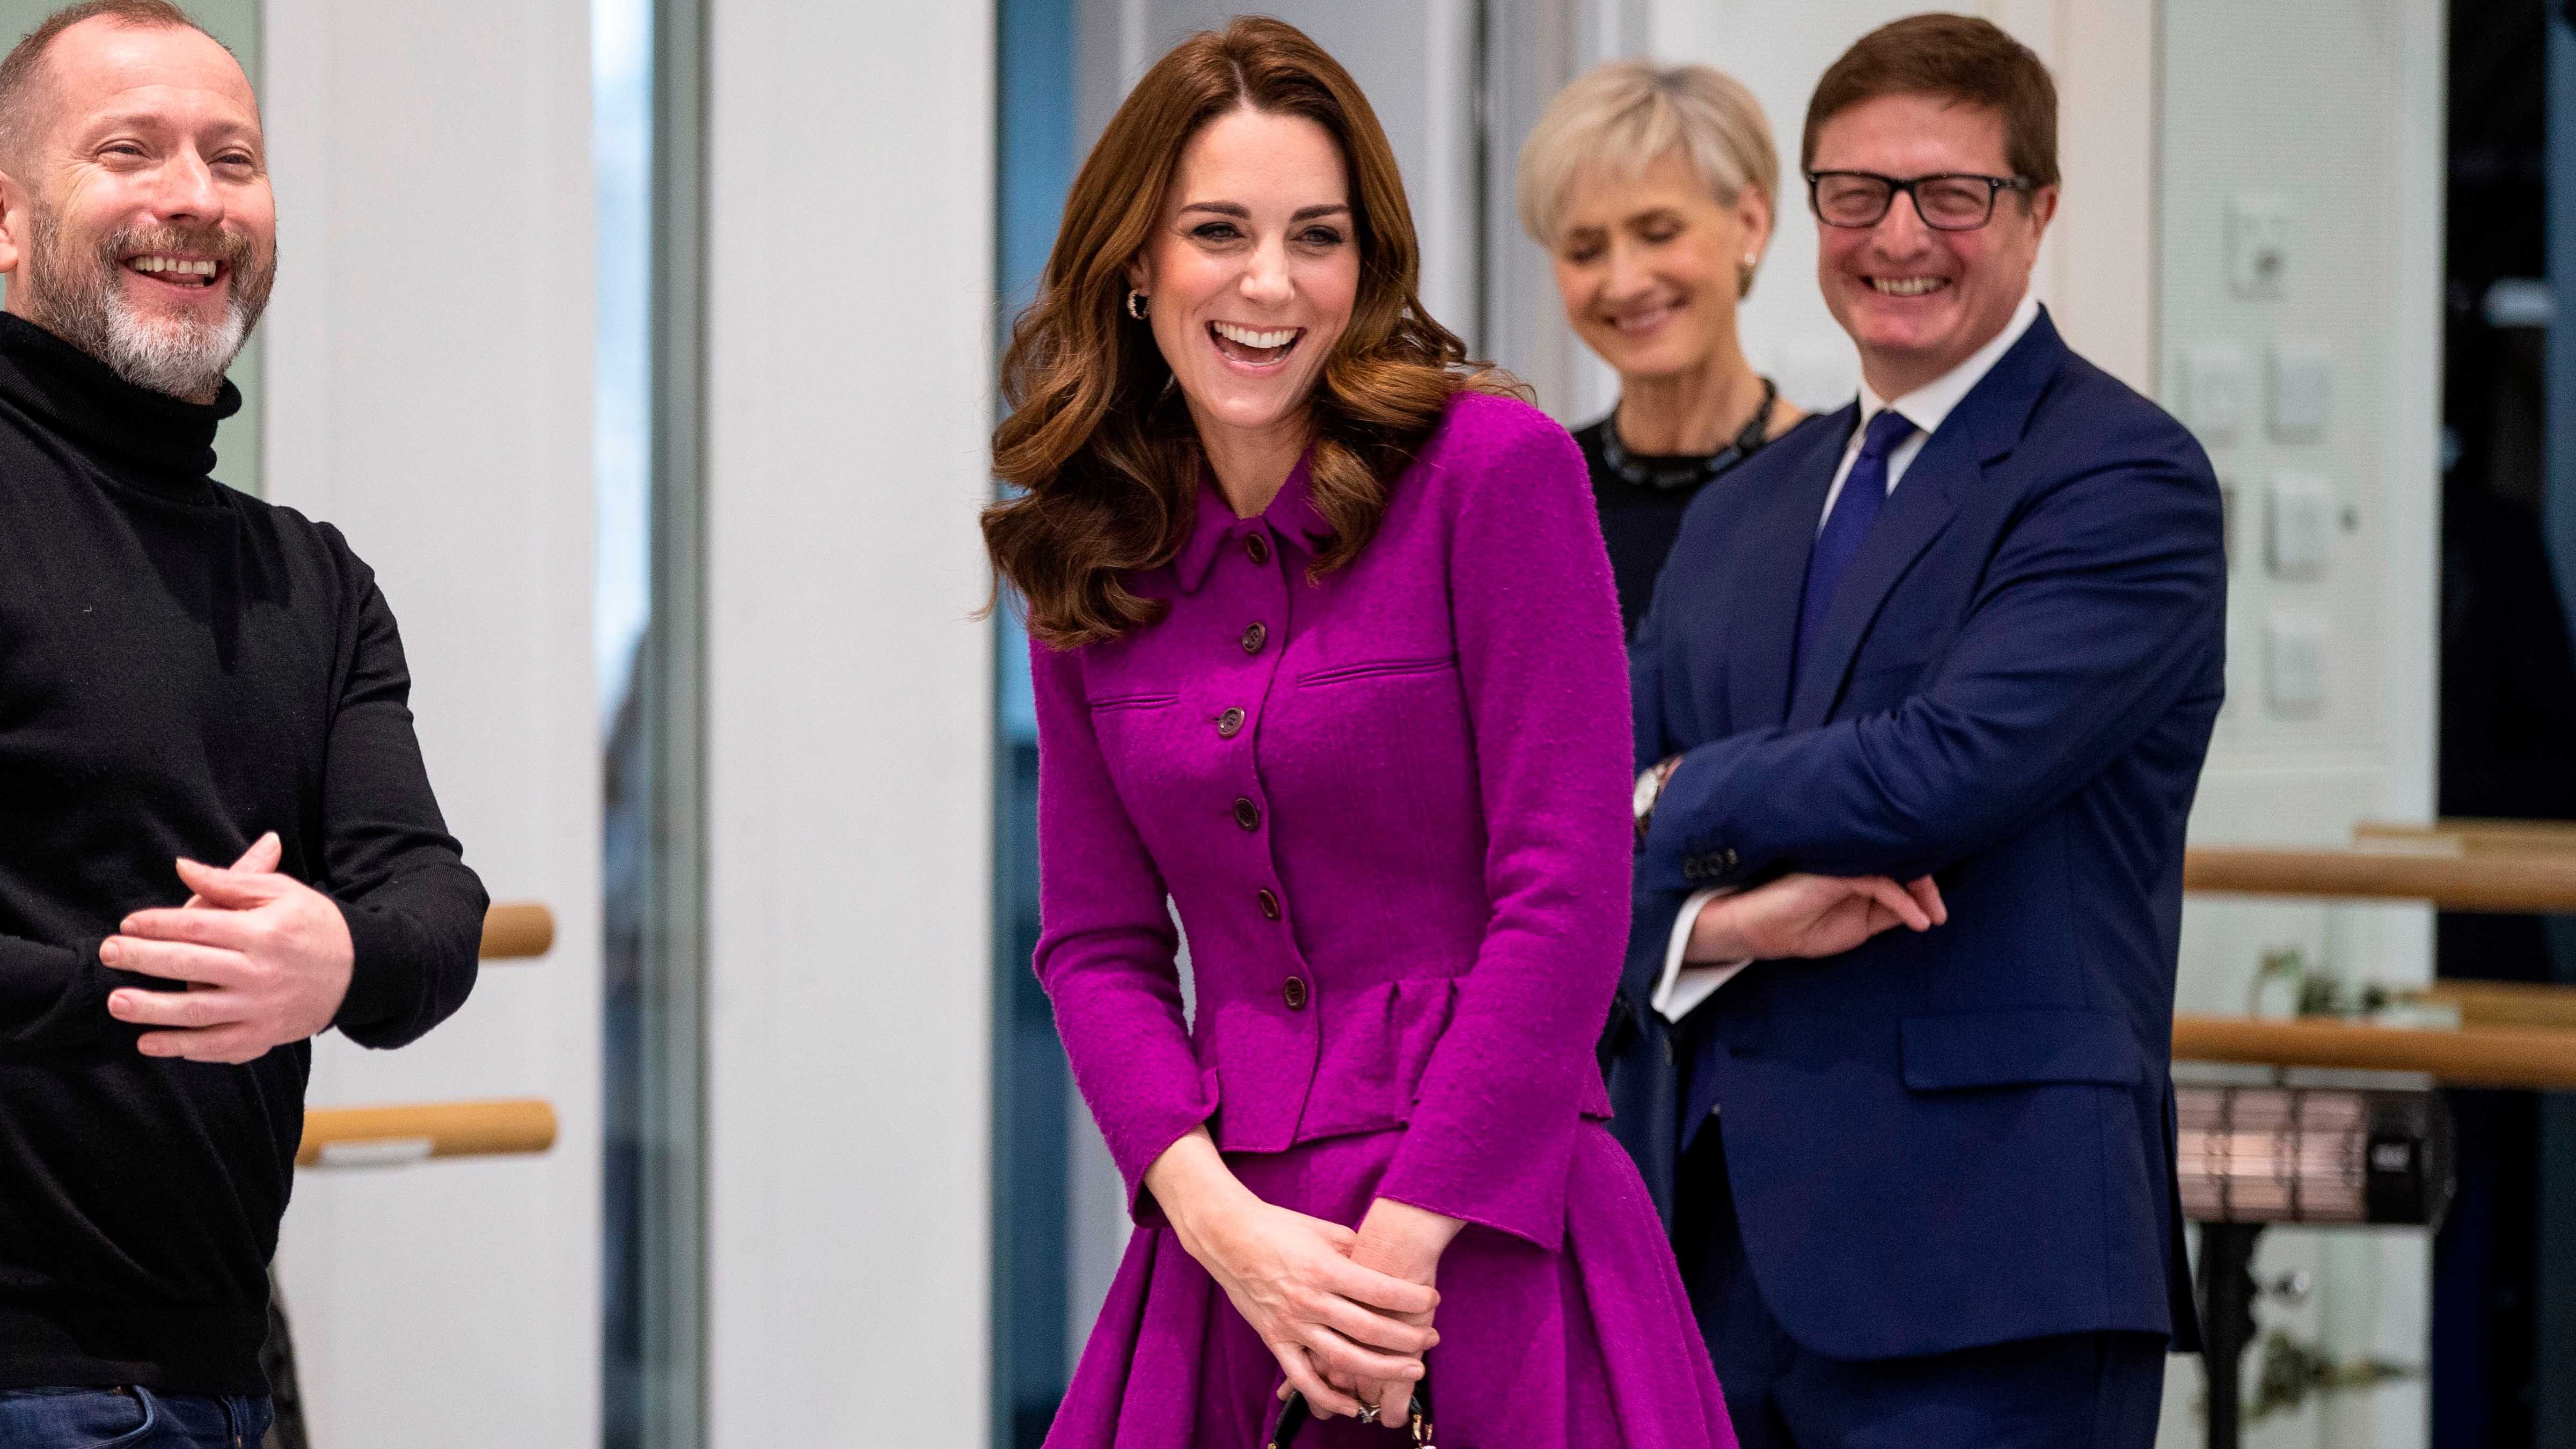 Kate Middleton Nailed the Casual Chic Look in This Blue Dress  Kate  middleton style, Kate middleton casual style, Kate middleton outfits